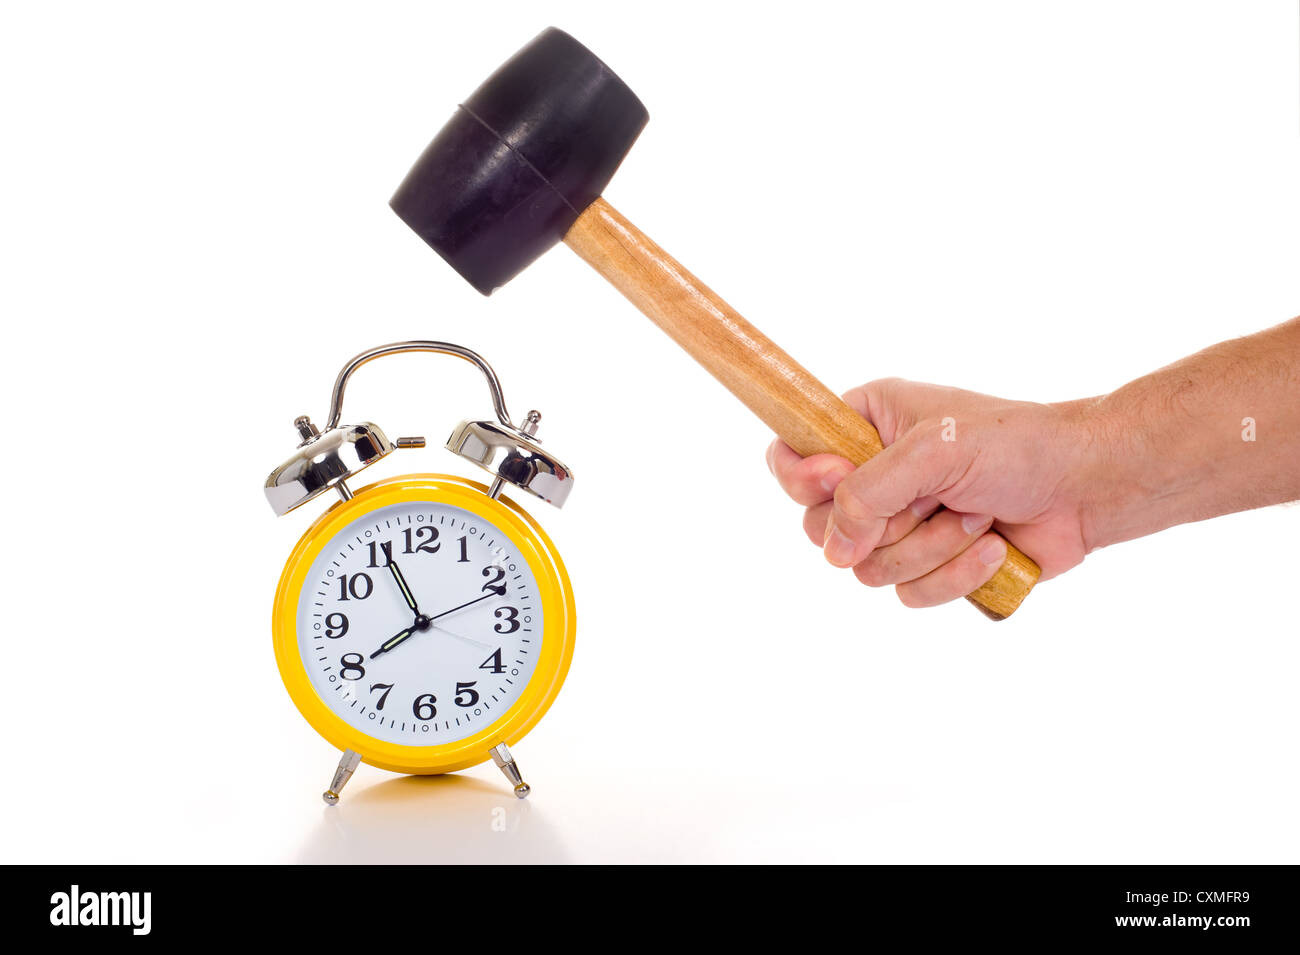 a hand holding a black mallet or hammer about to crush an old fashioned yellow alarm clock on a white background, time concept Stock Photo